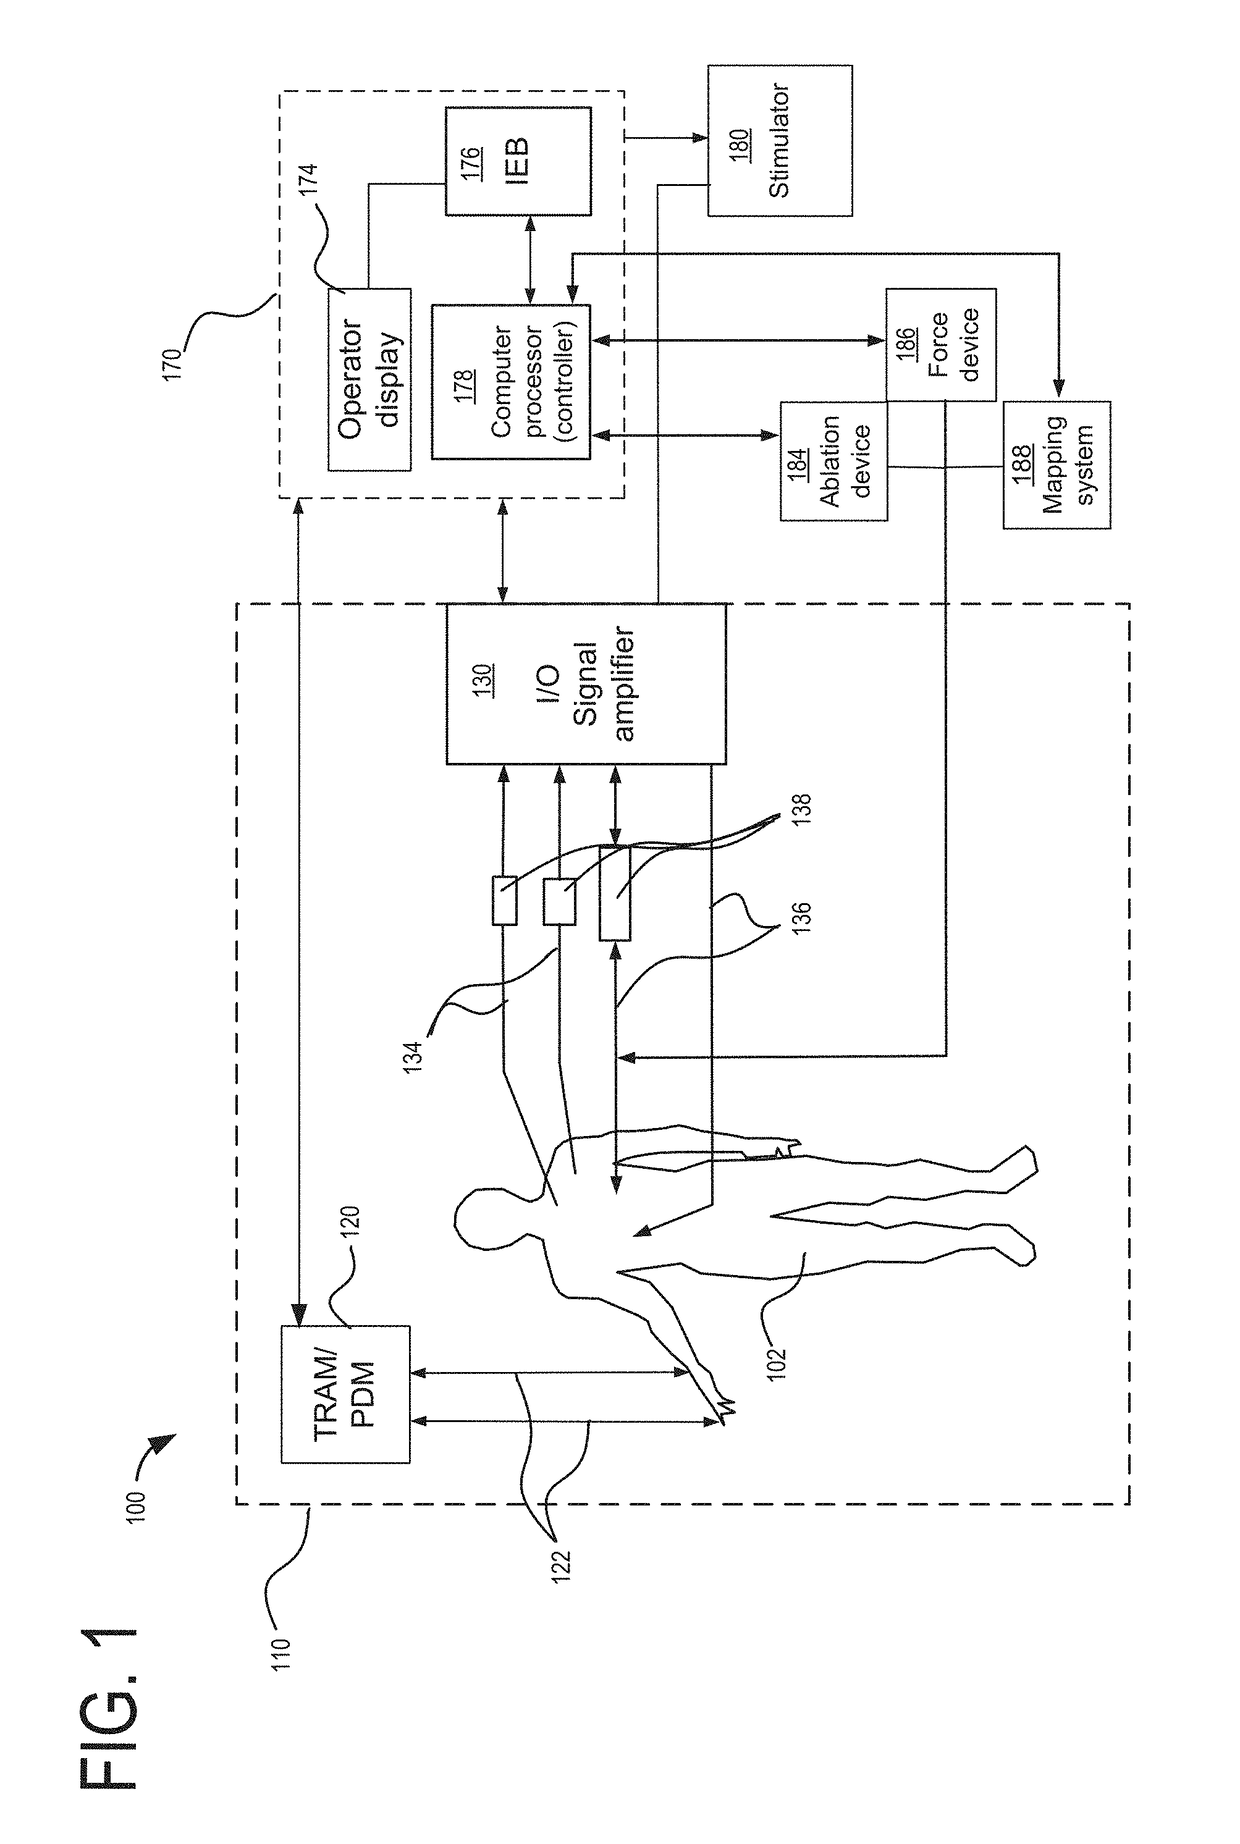 Methods and systems for electrophysiology ablation gap analysis